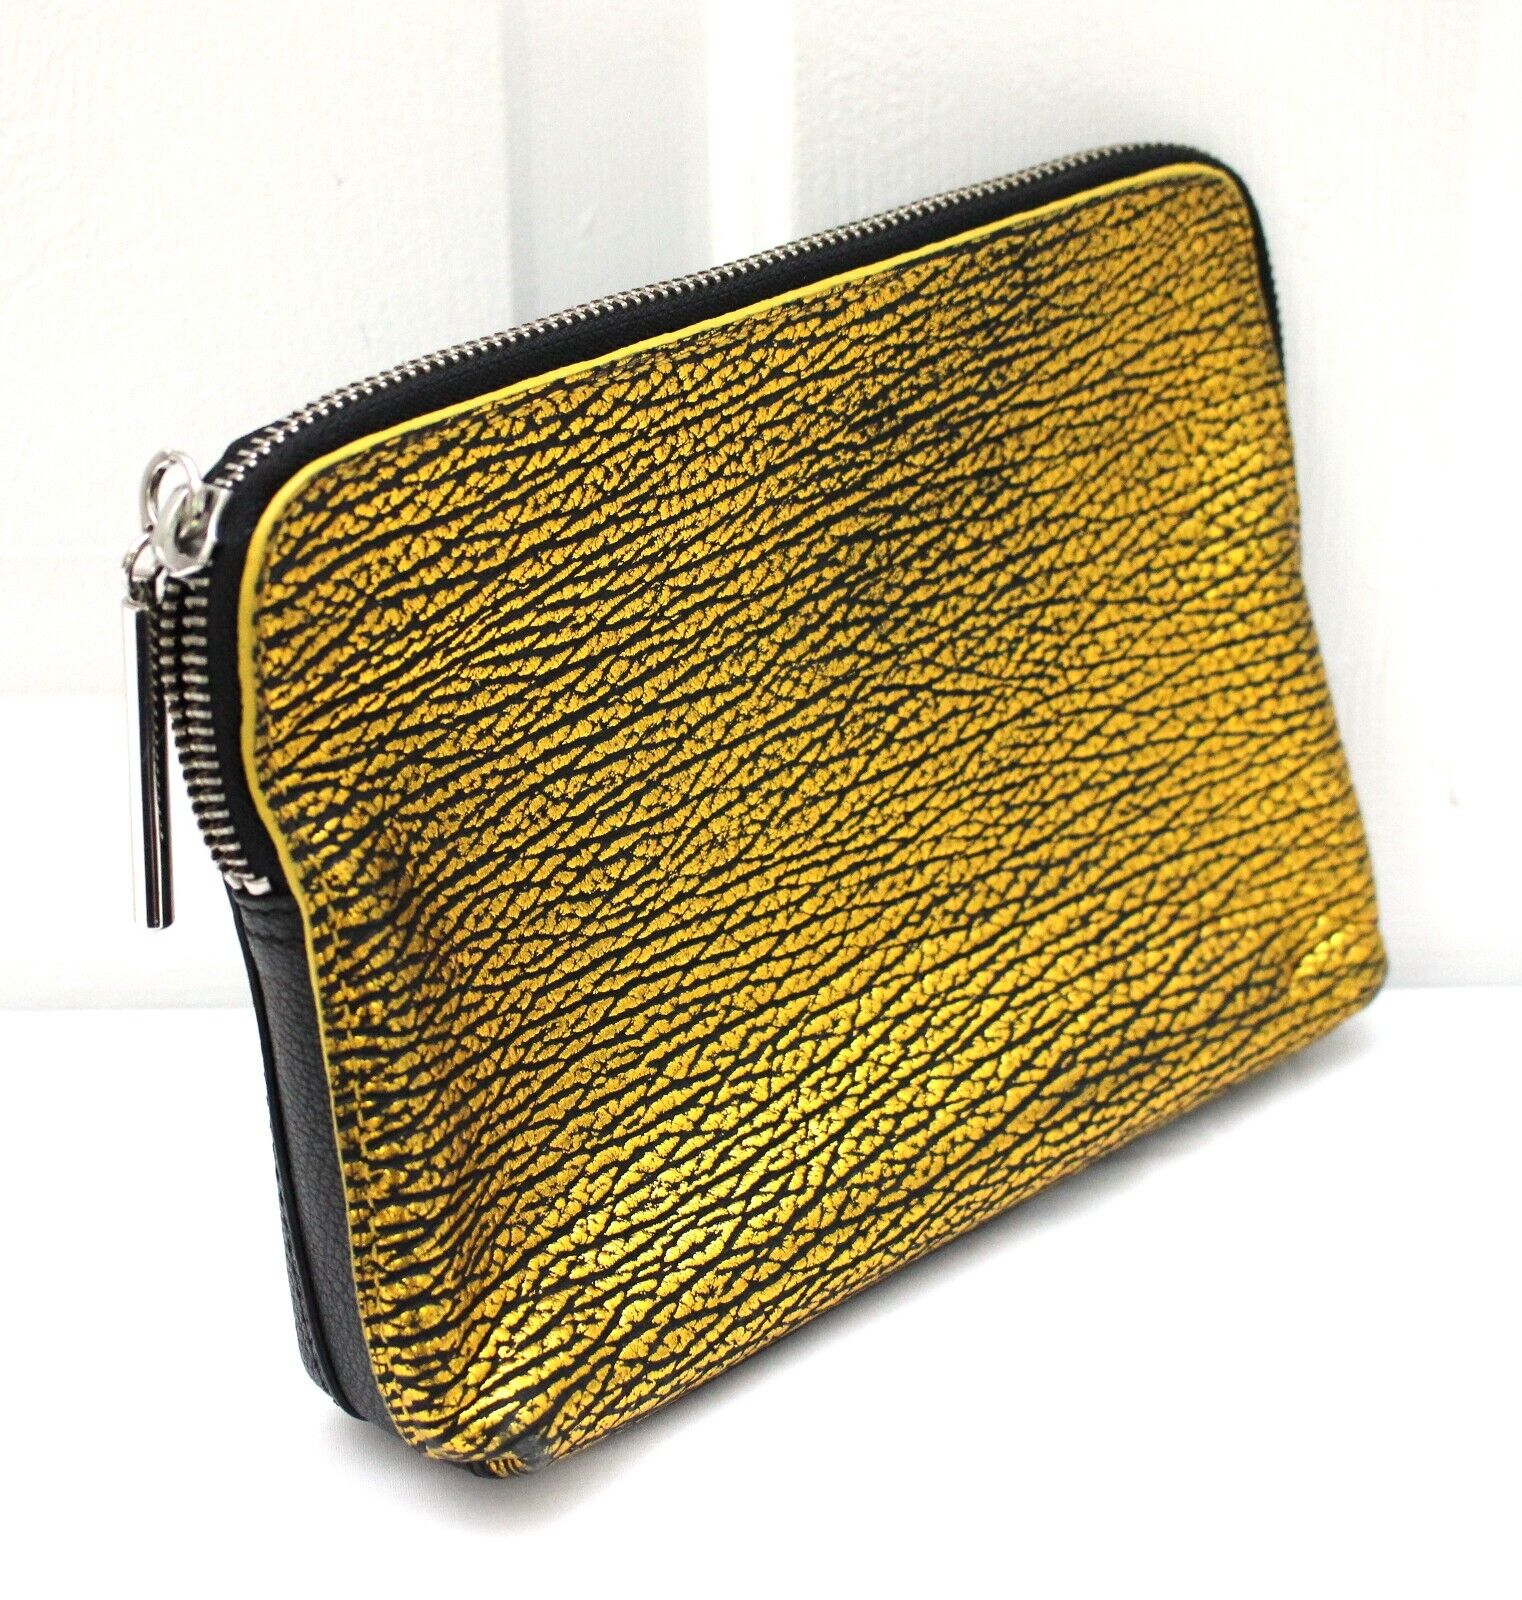 3.1 PHILLIP LIM Leather 31 Minute Clutch Cosmetic Pouch Black & Gold Leather